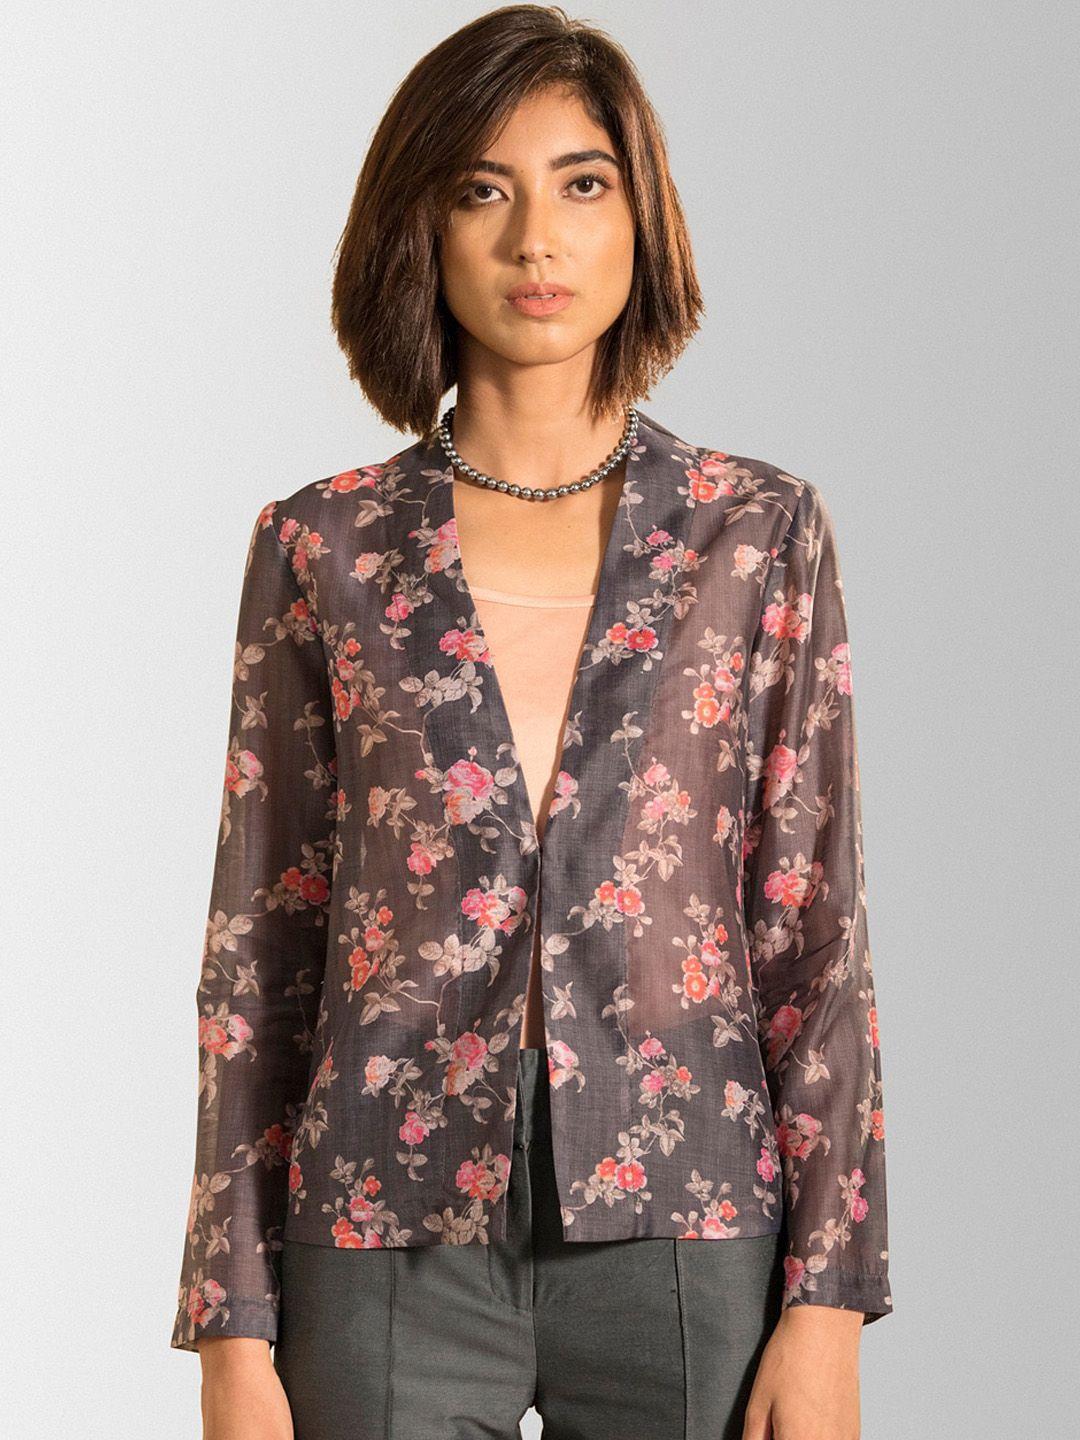 fablestreet women grey & pink floral printed lightweight tailored jacket